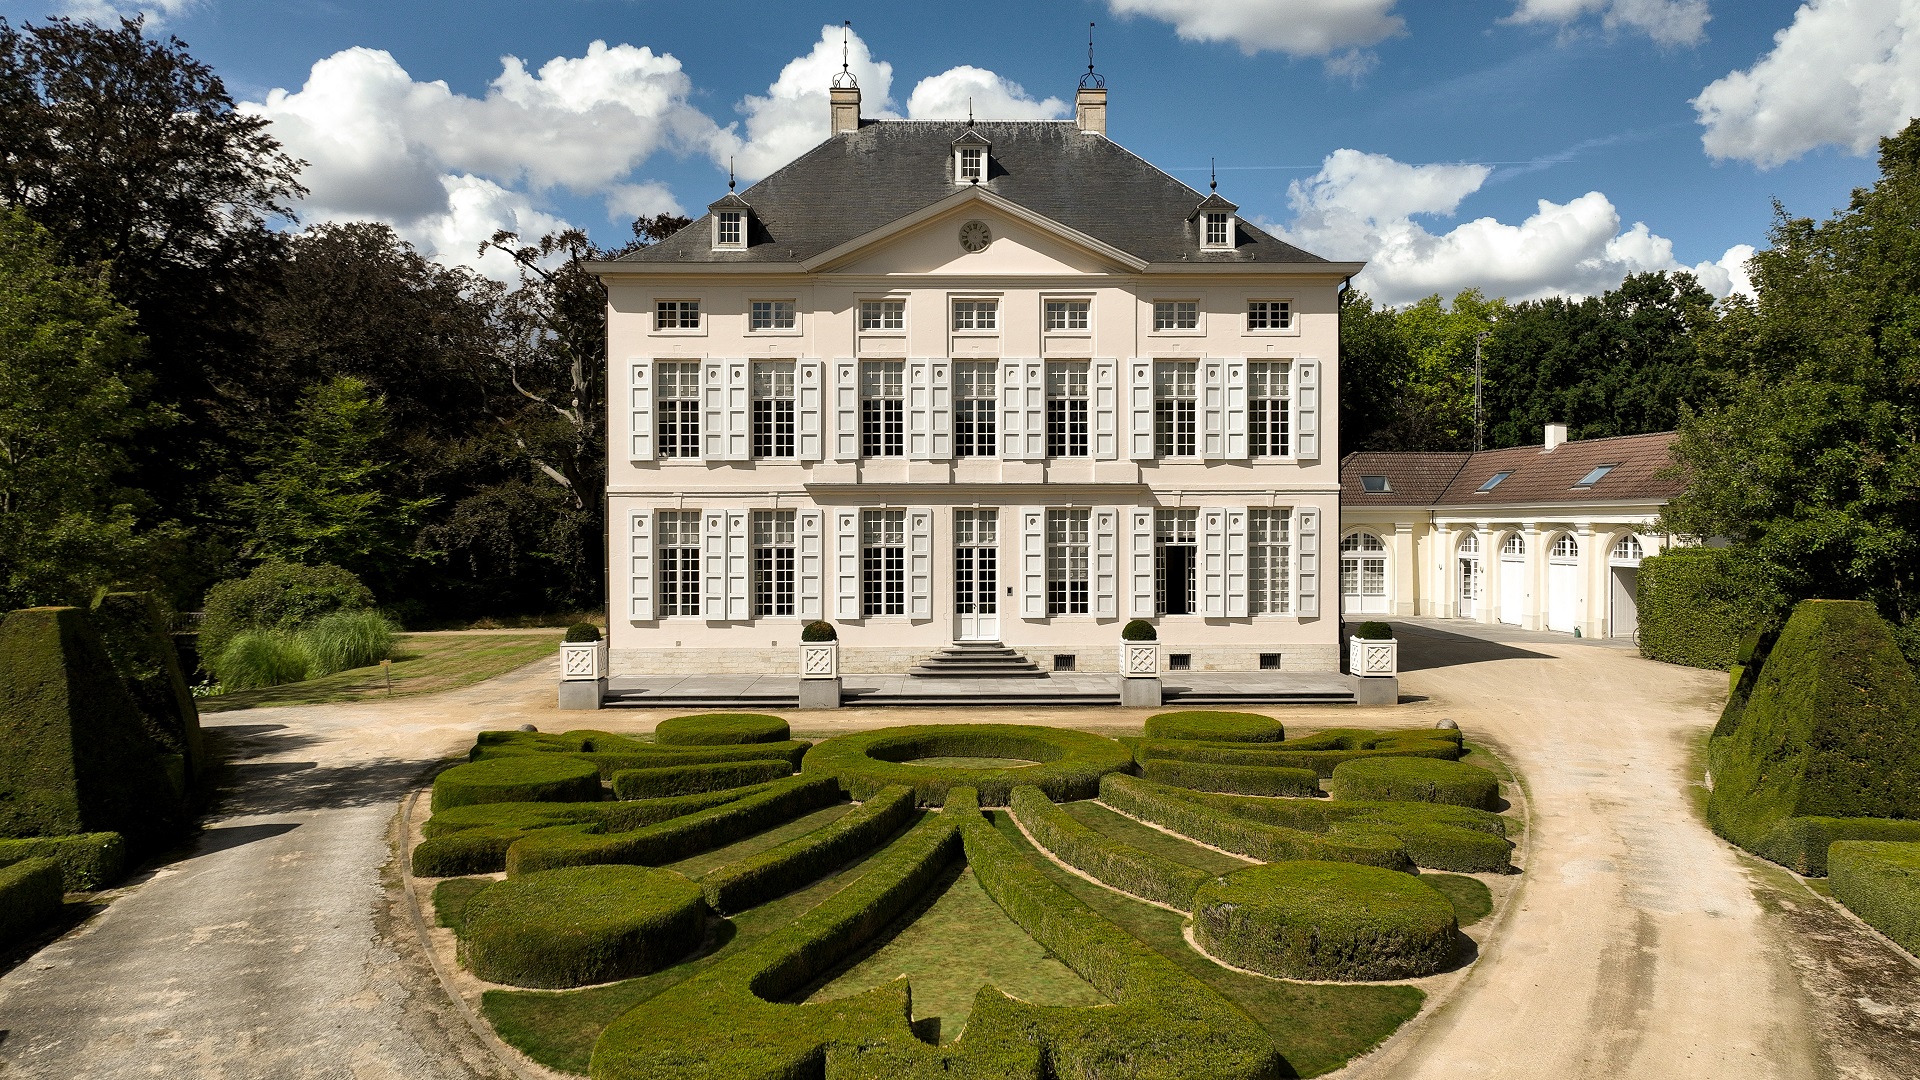 Christie’s International Real Estate Launches in Belgium, Partnering with Leading Real Estate Brokerage, Hillewaere